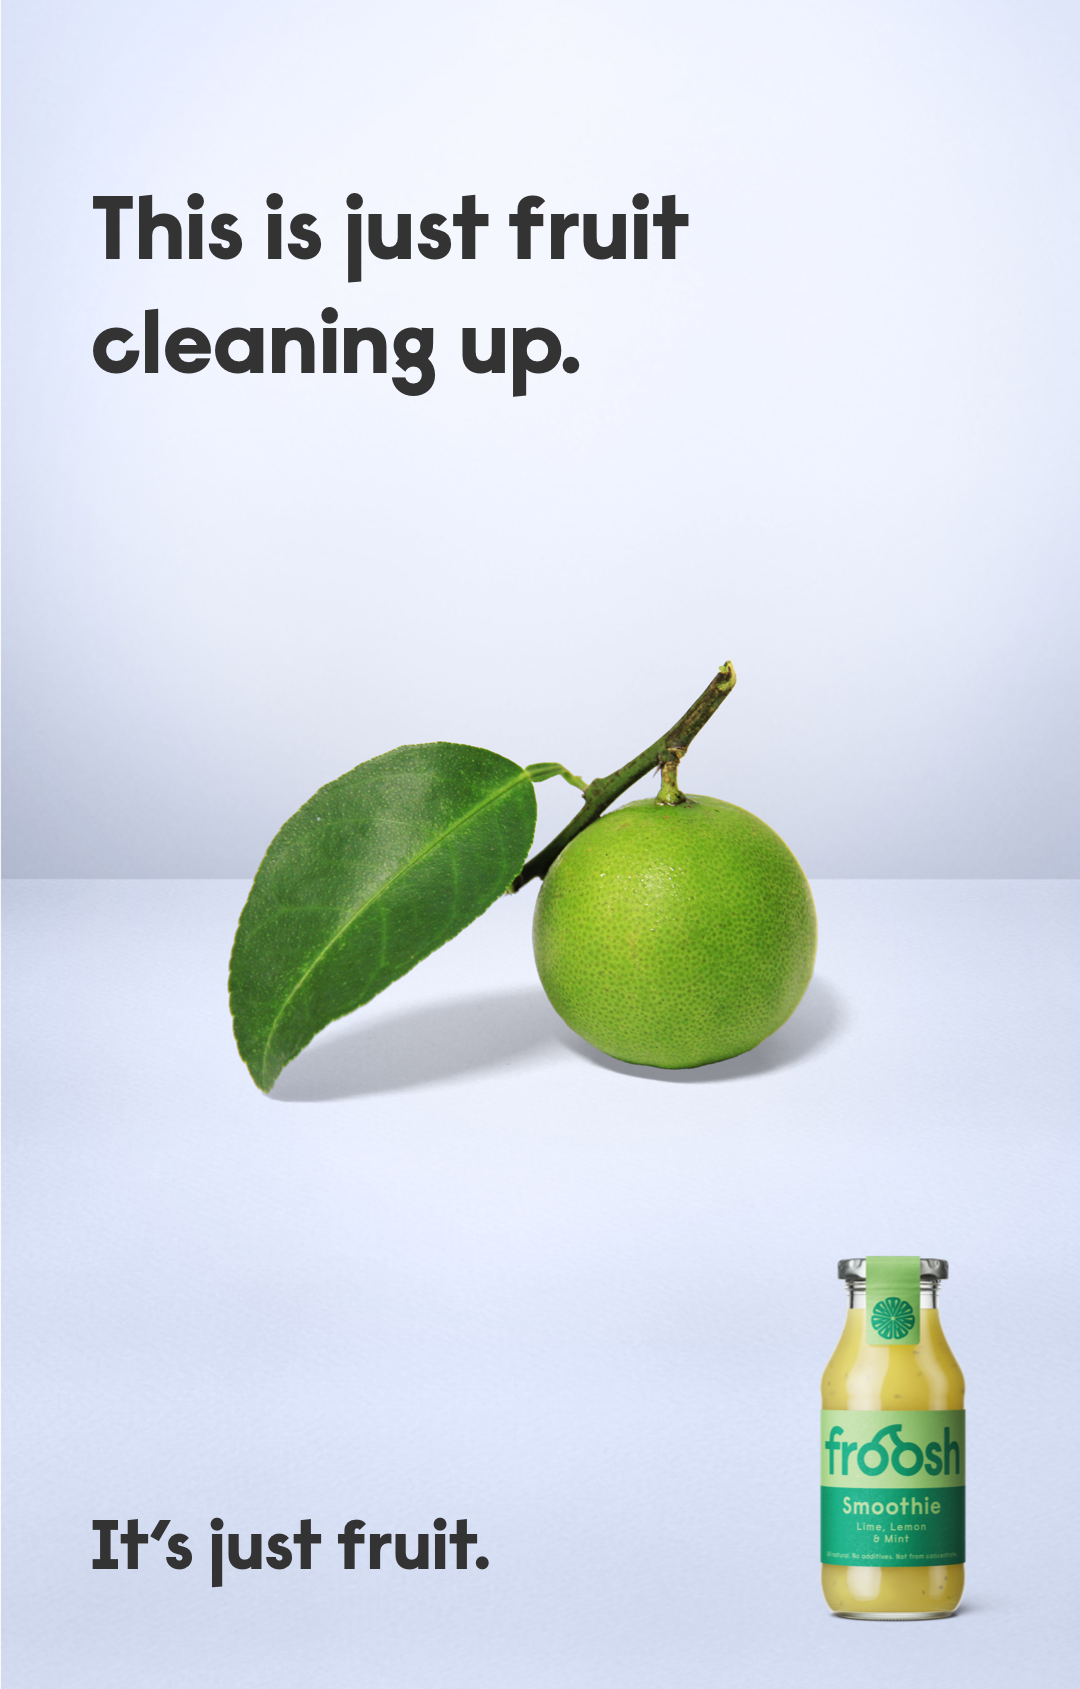 Lime cleaning